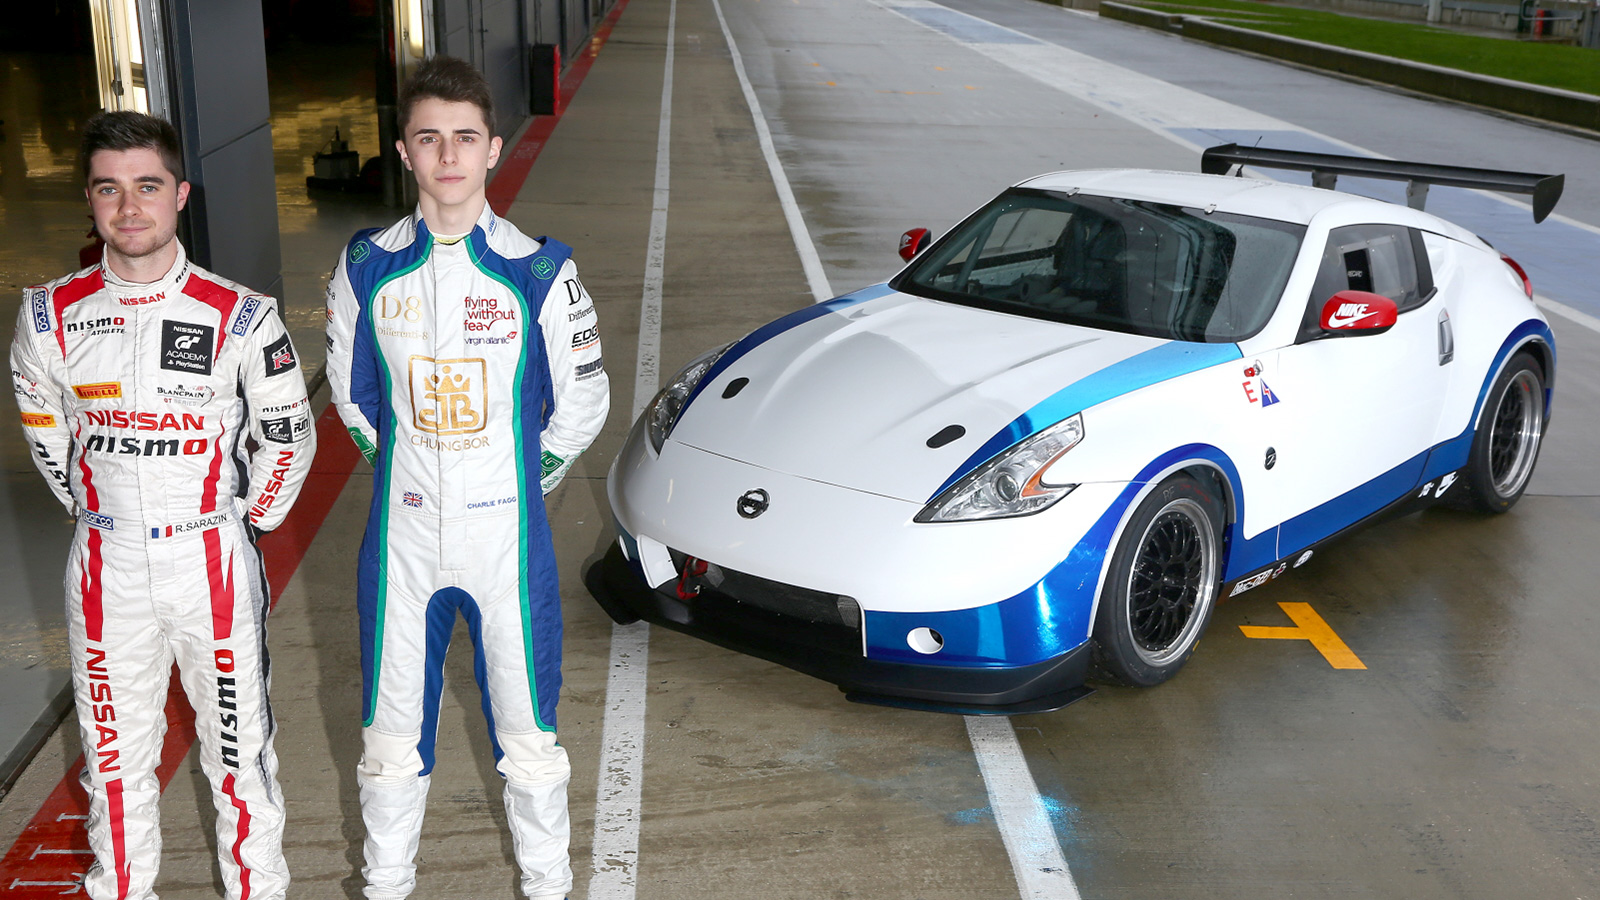 Charlie Fagg and Romain Sarazin team-up for first time at Silverstone GP.